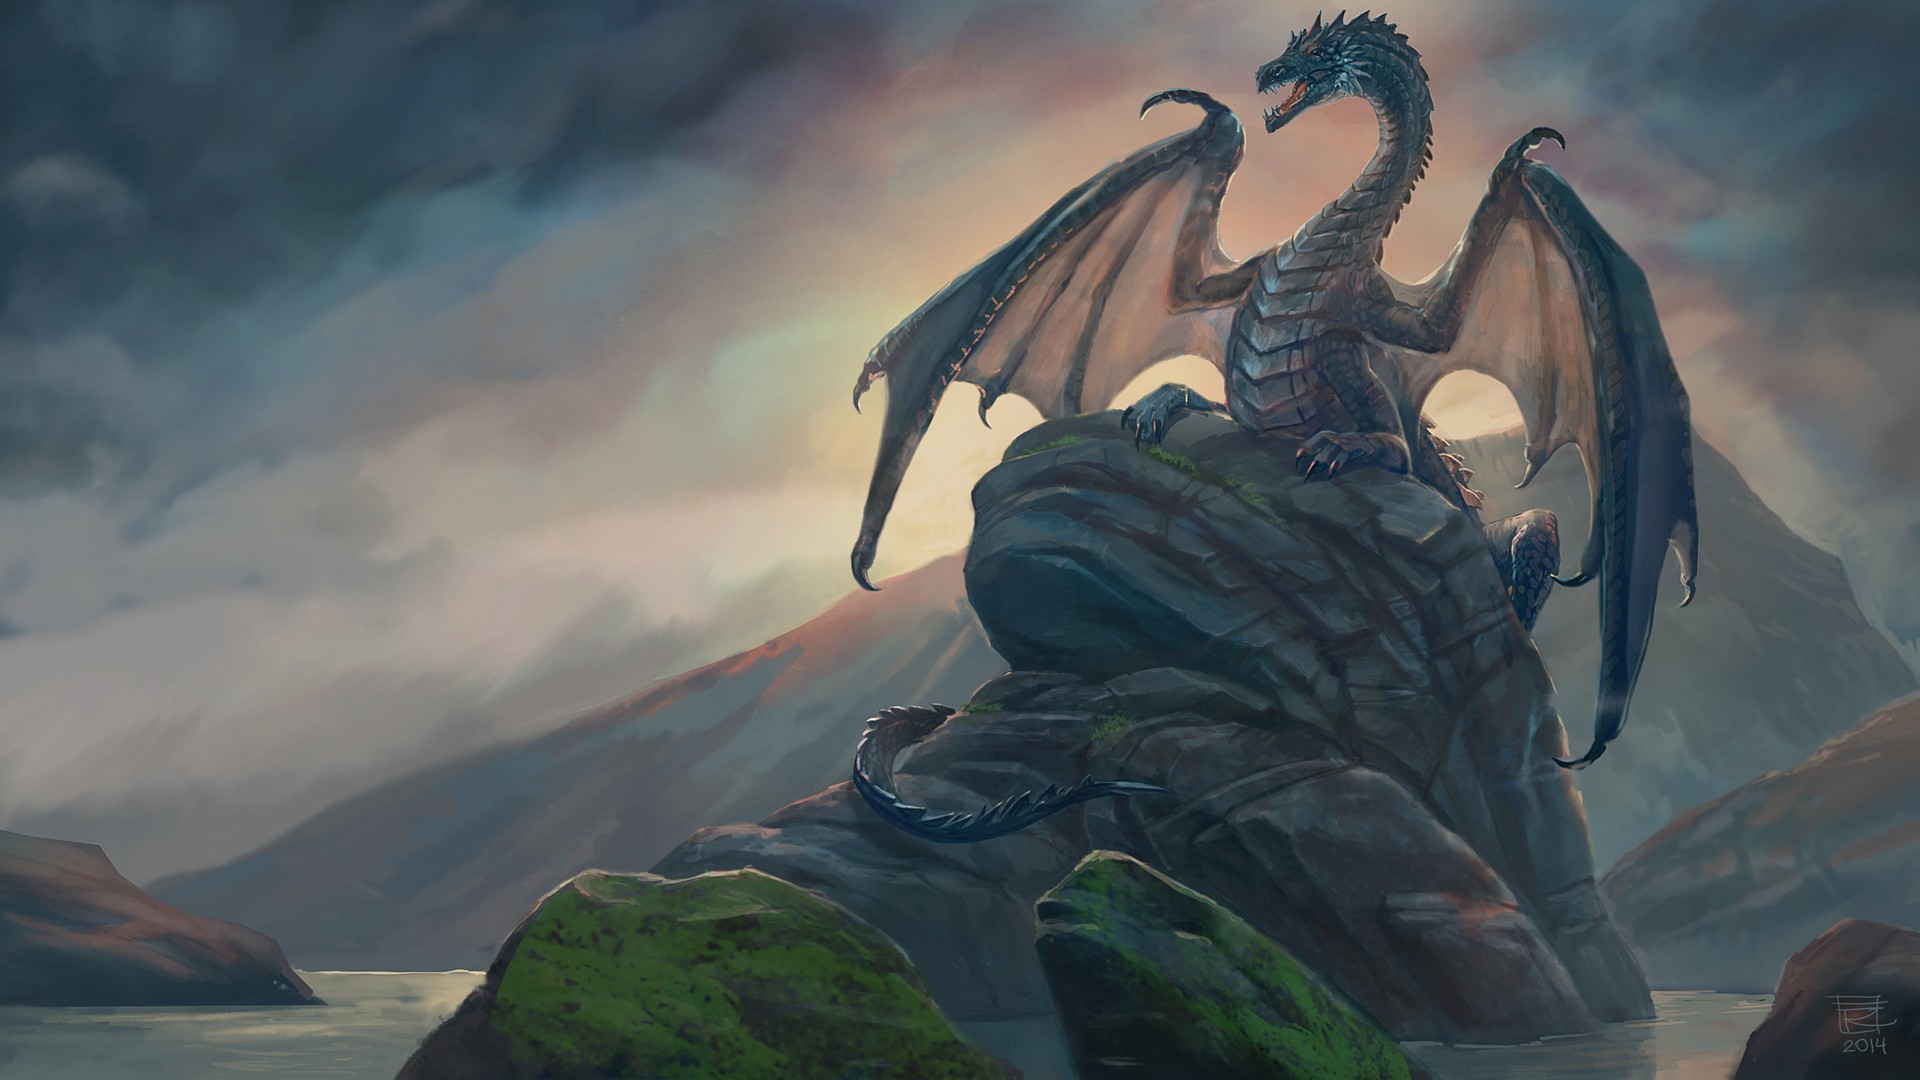 Dragon sitting on a rock wallpapers and images wallpapers pictures 